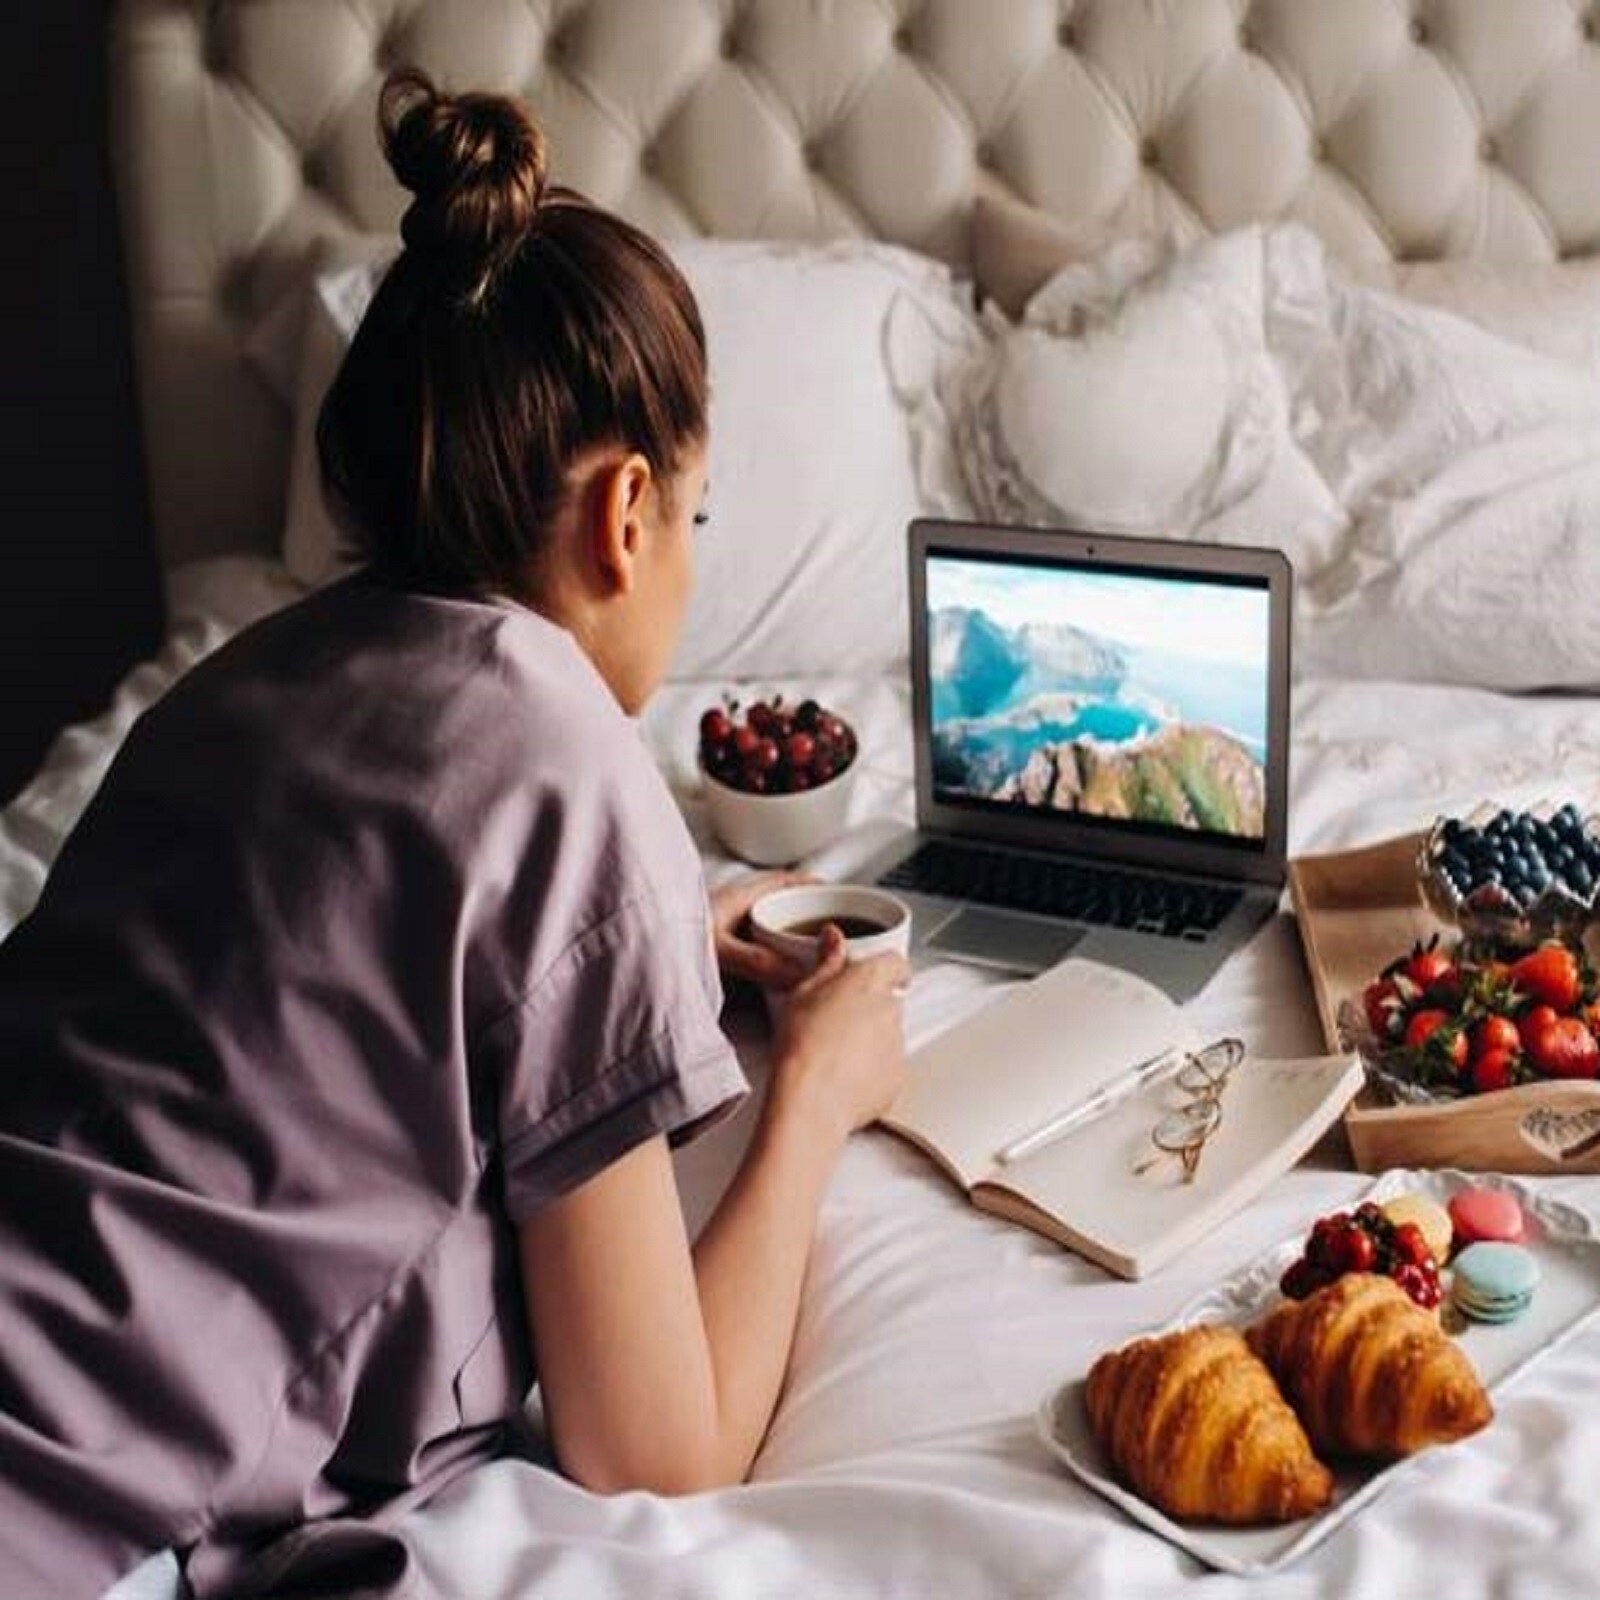 What happens if we eat food on bed according to Astrology